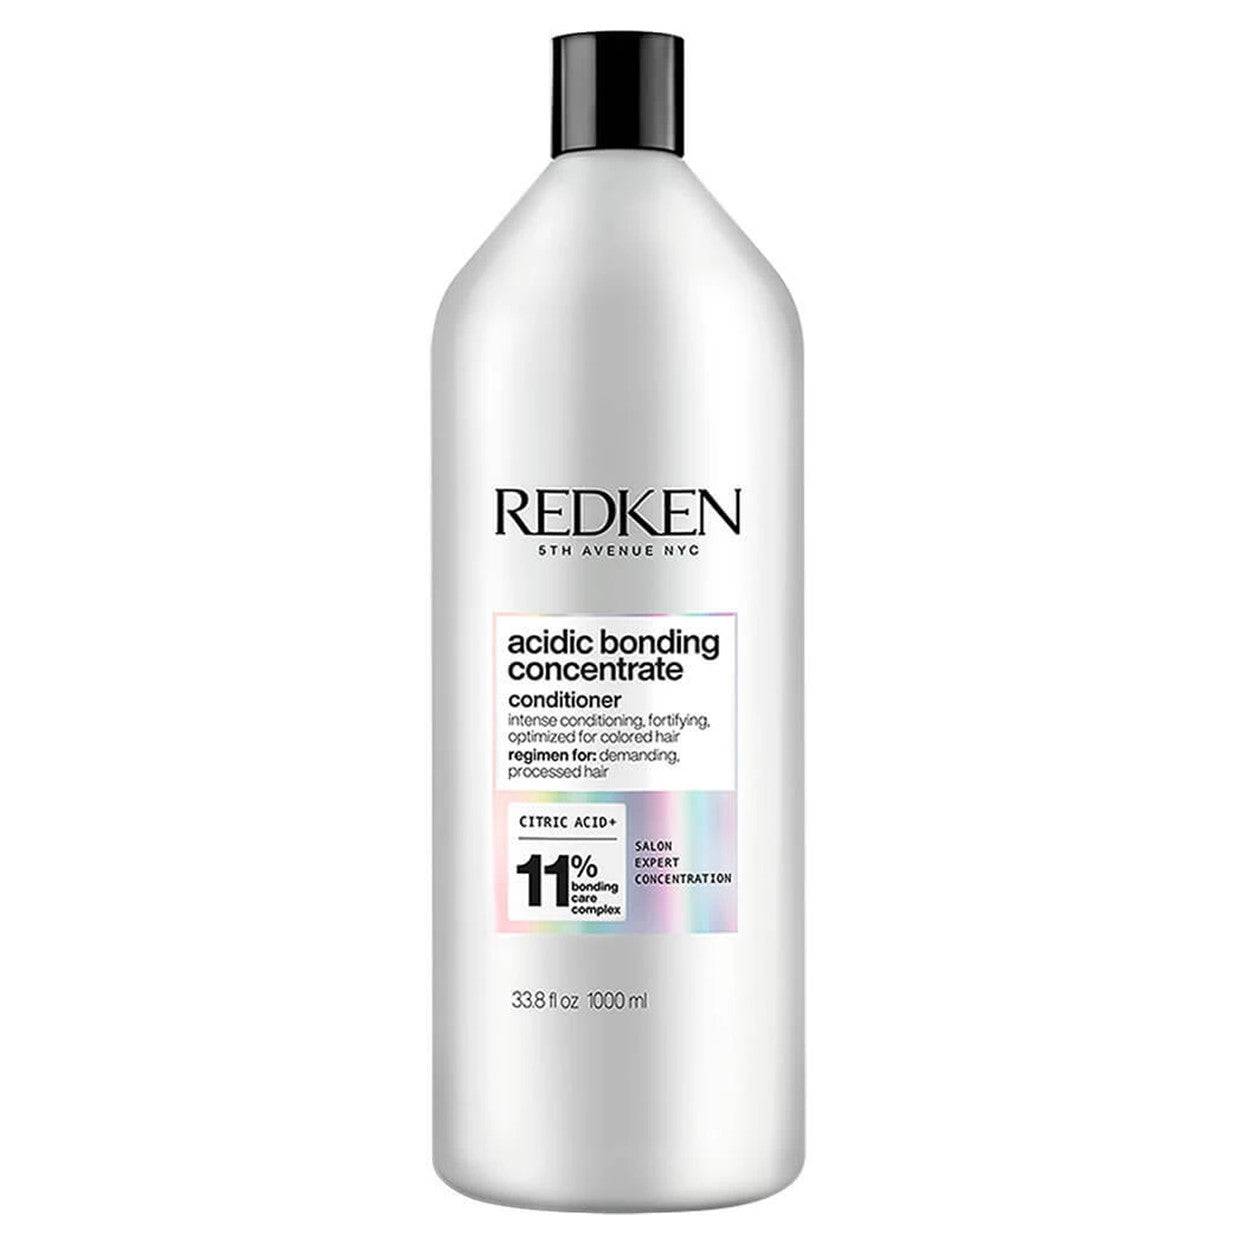 Redken Acidic Bonding Concentrate Conditioner 1000ml - On Line Hair Depot